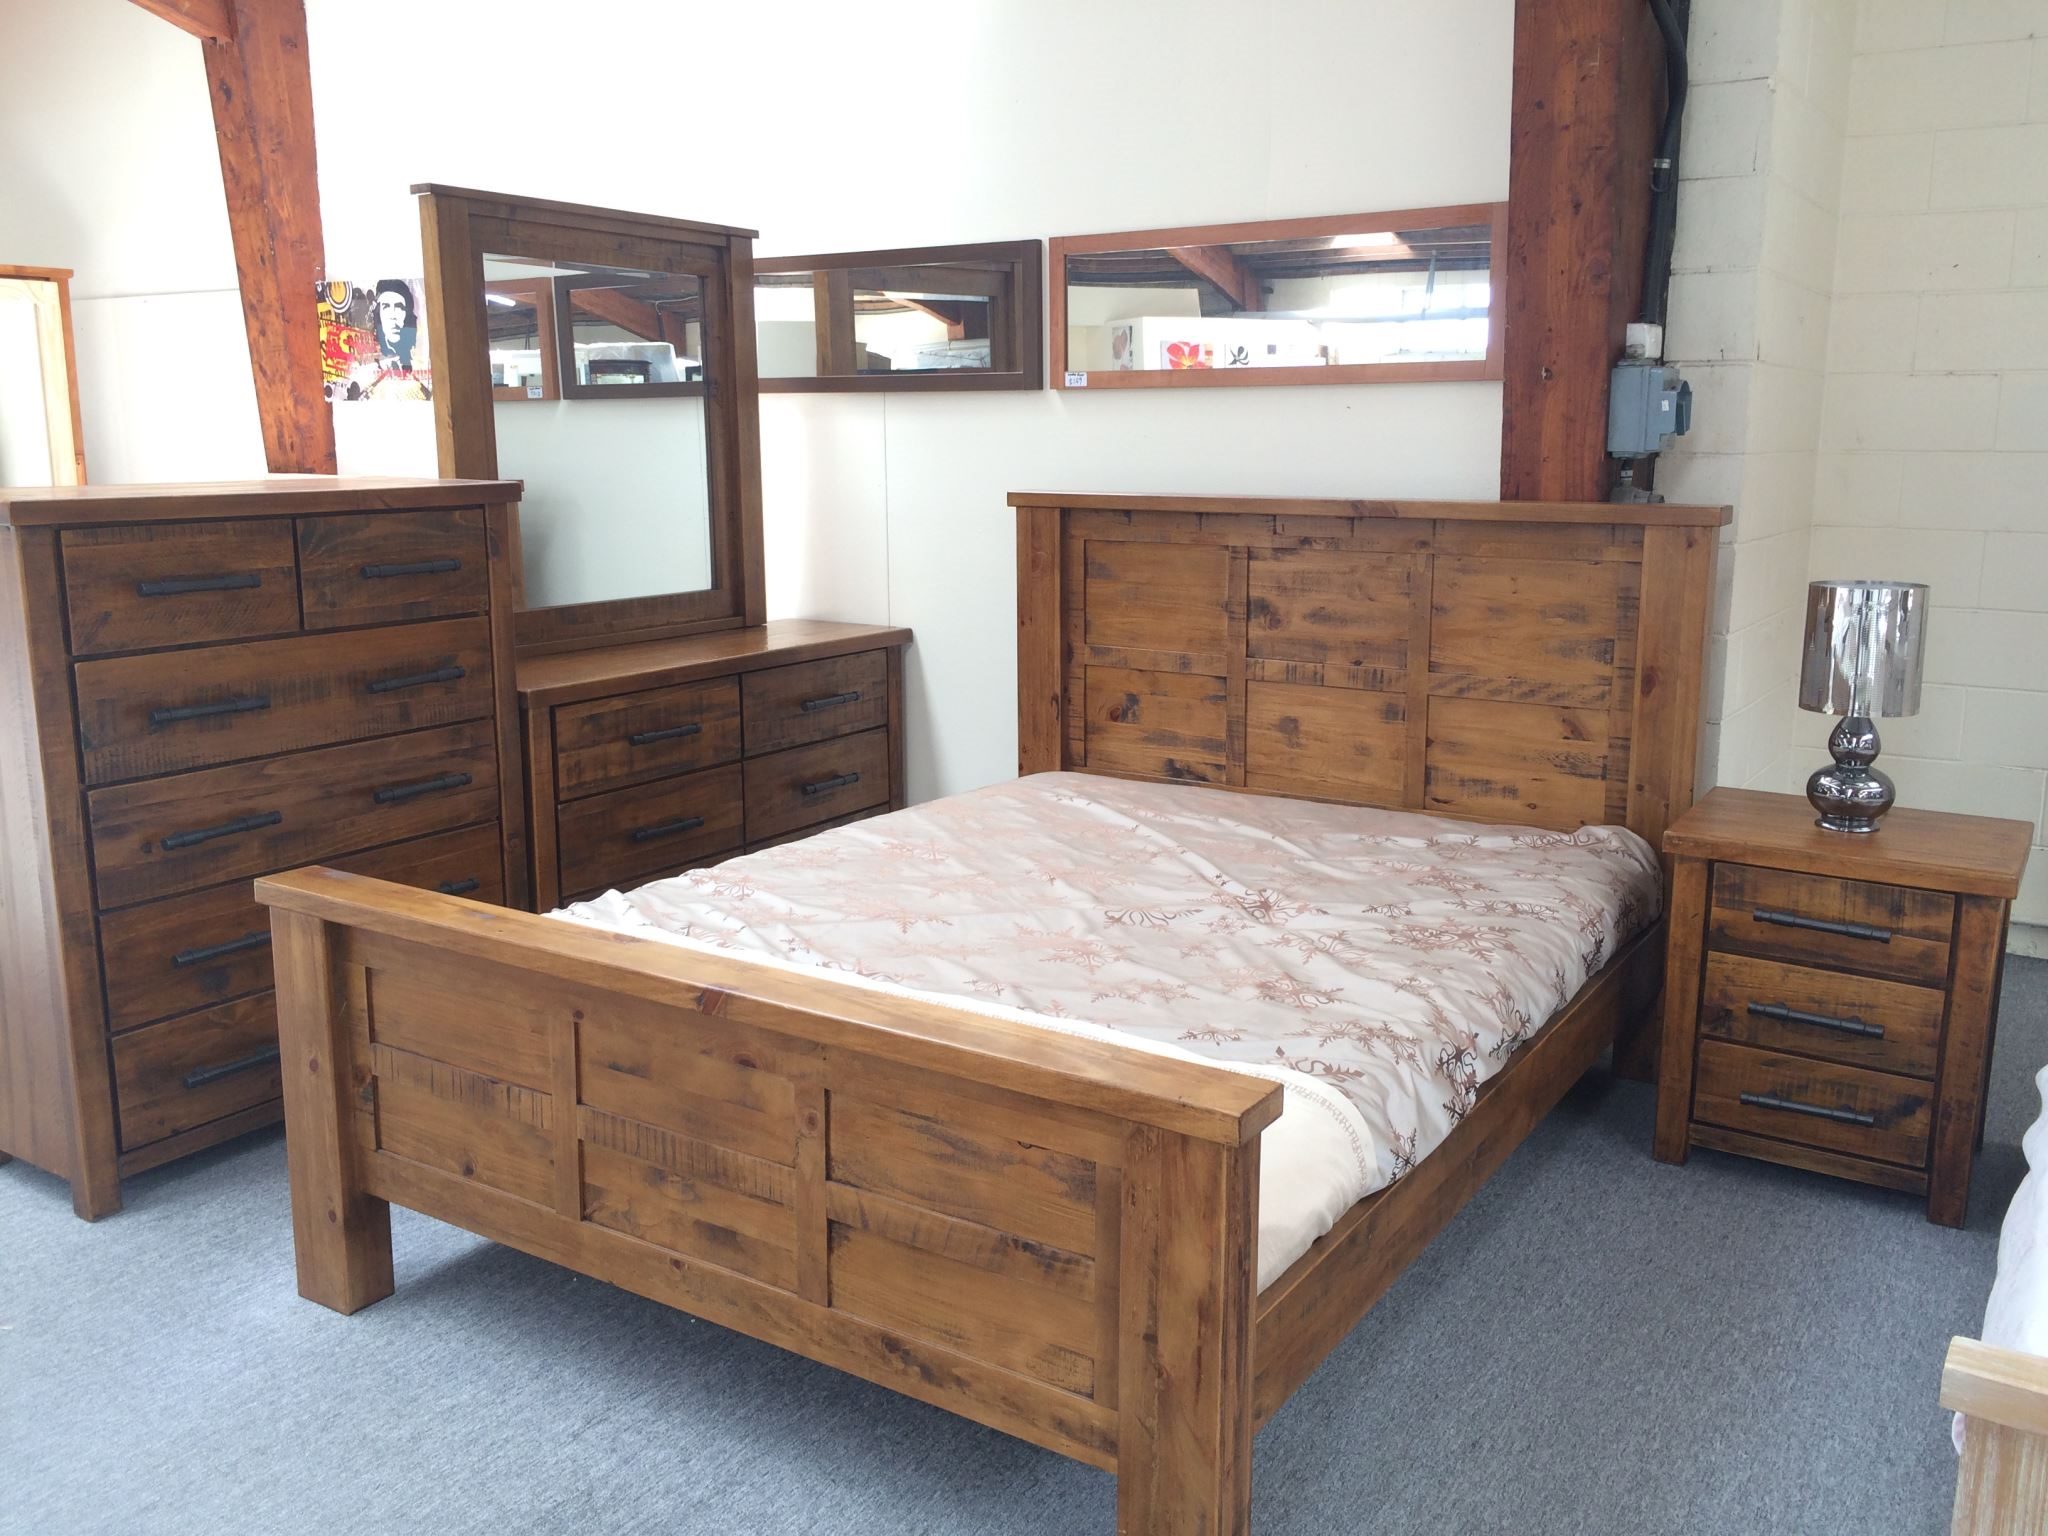 4pcs King Size Bedroom Suite Solid Pine Wood Rough Sawn And Rustic Woodlock